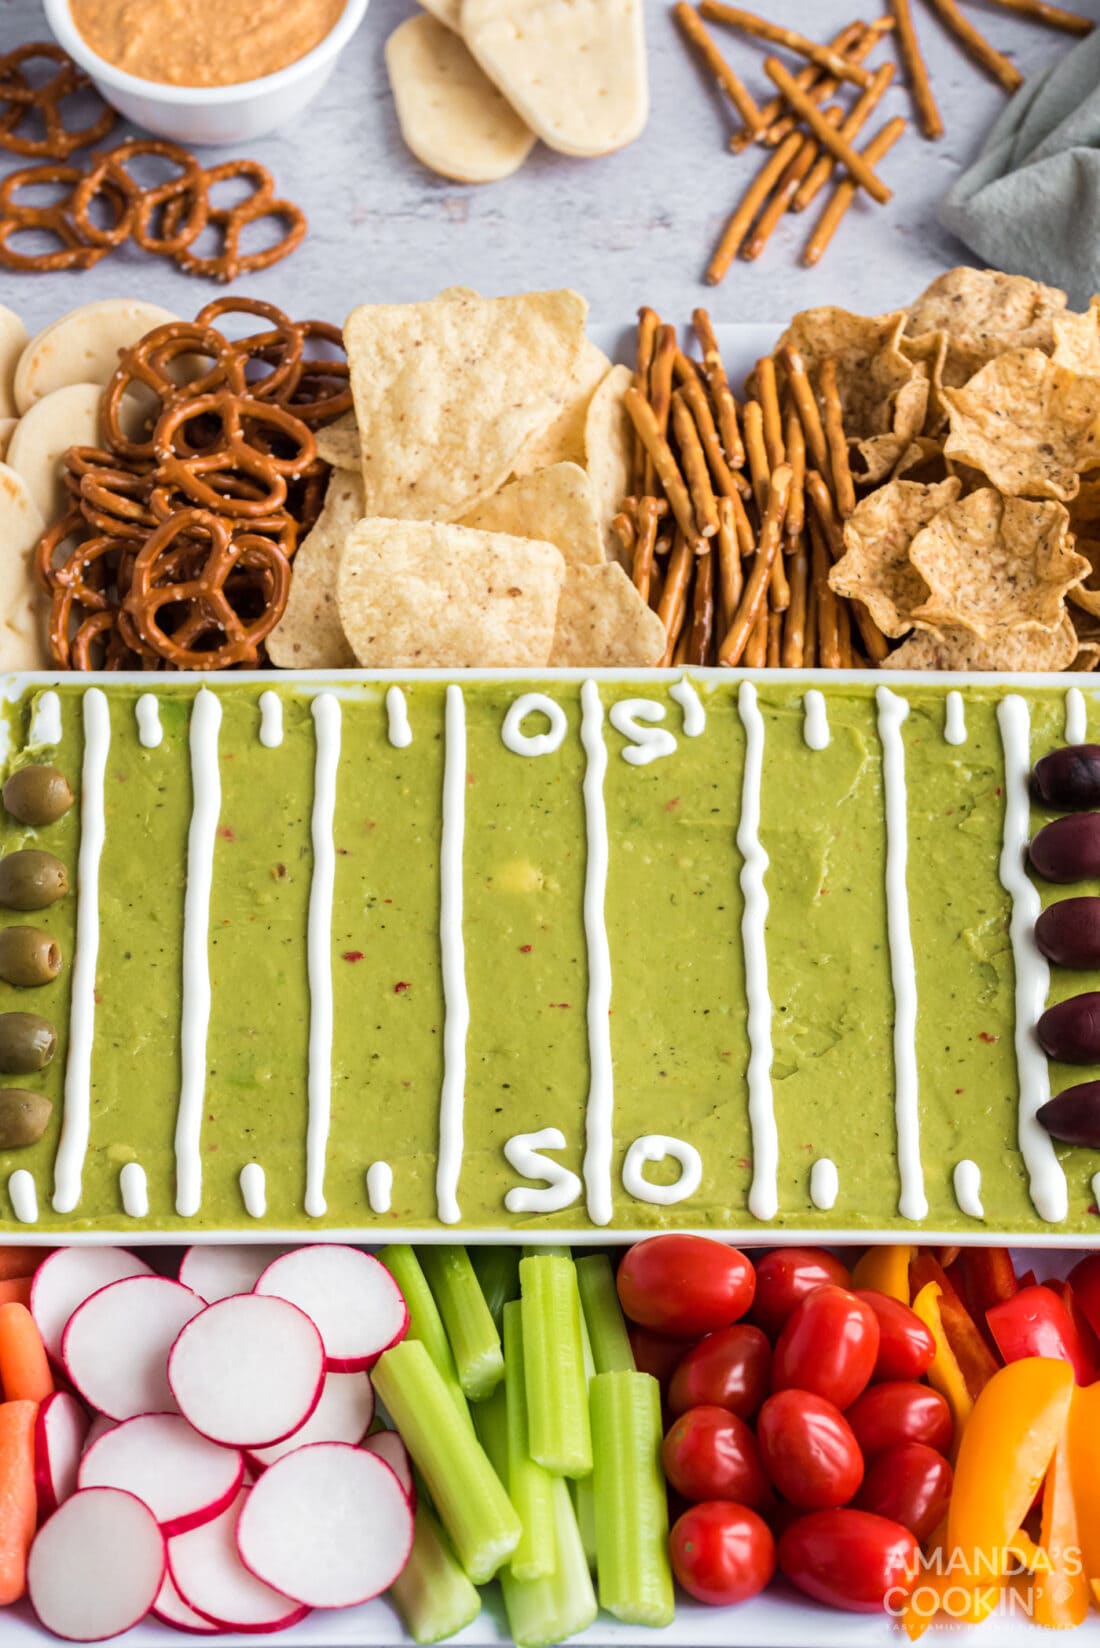 football party tray with guac, veggies, and crackers